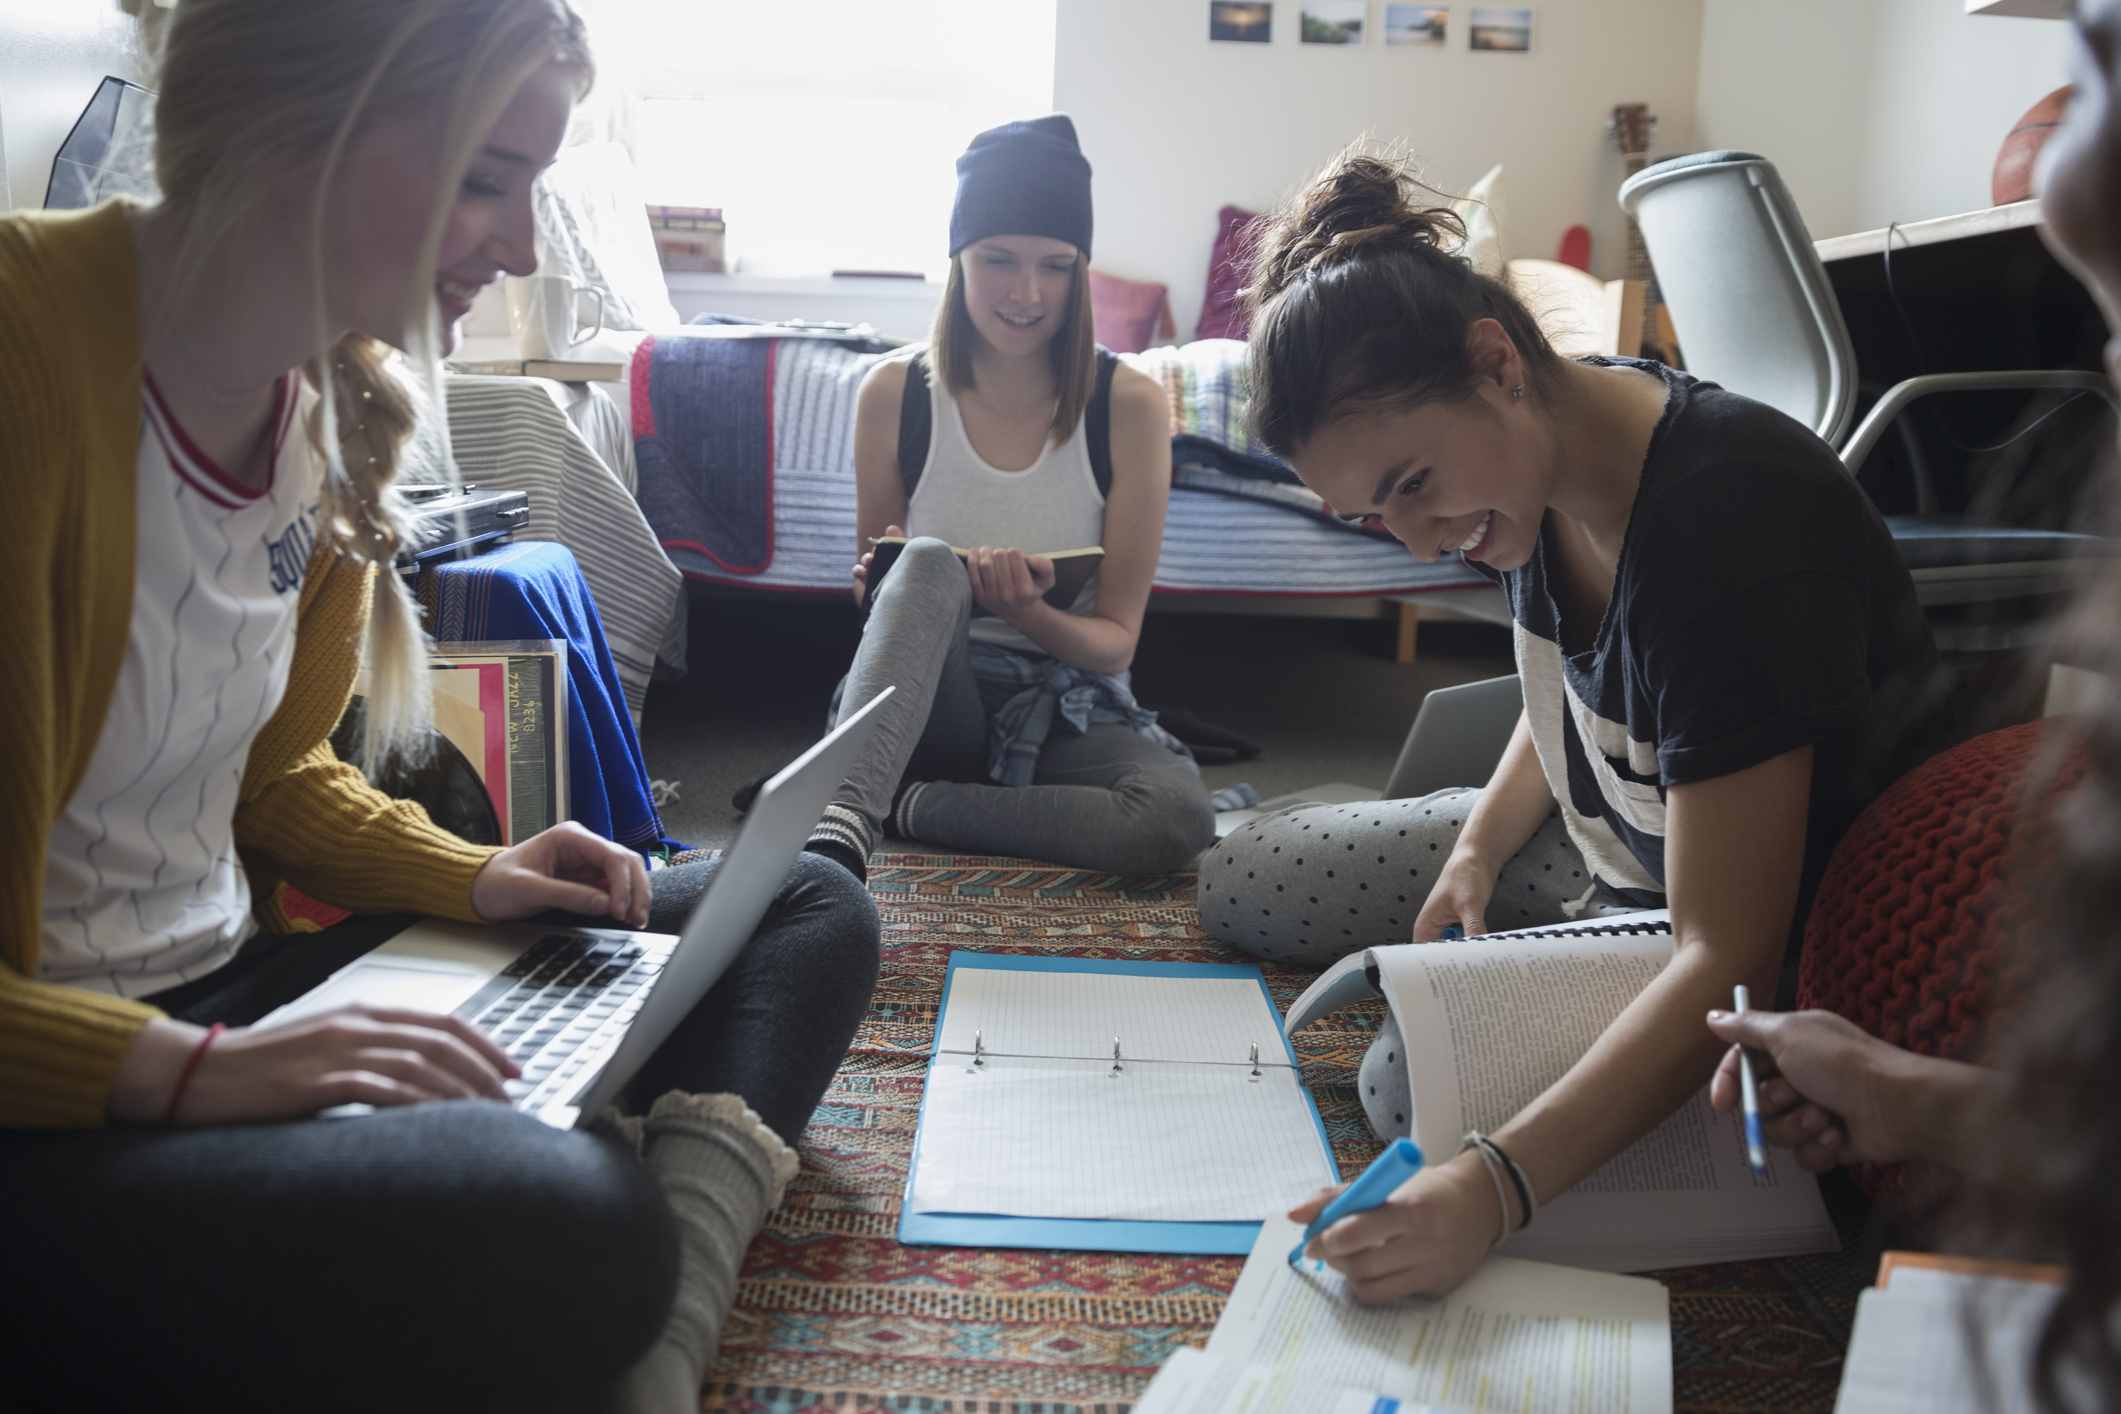 Group of women studying in a dorm room